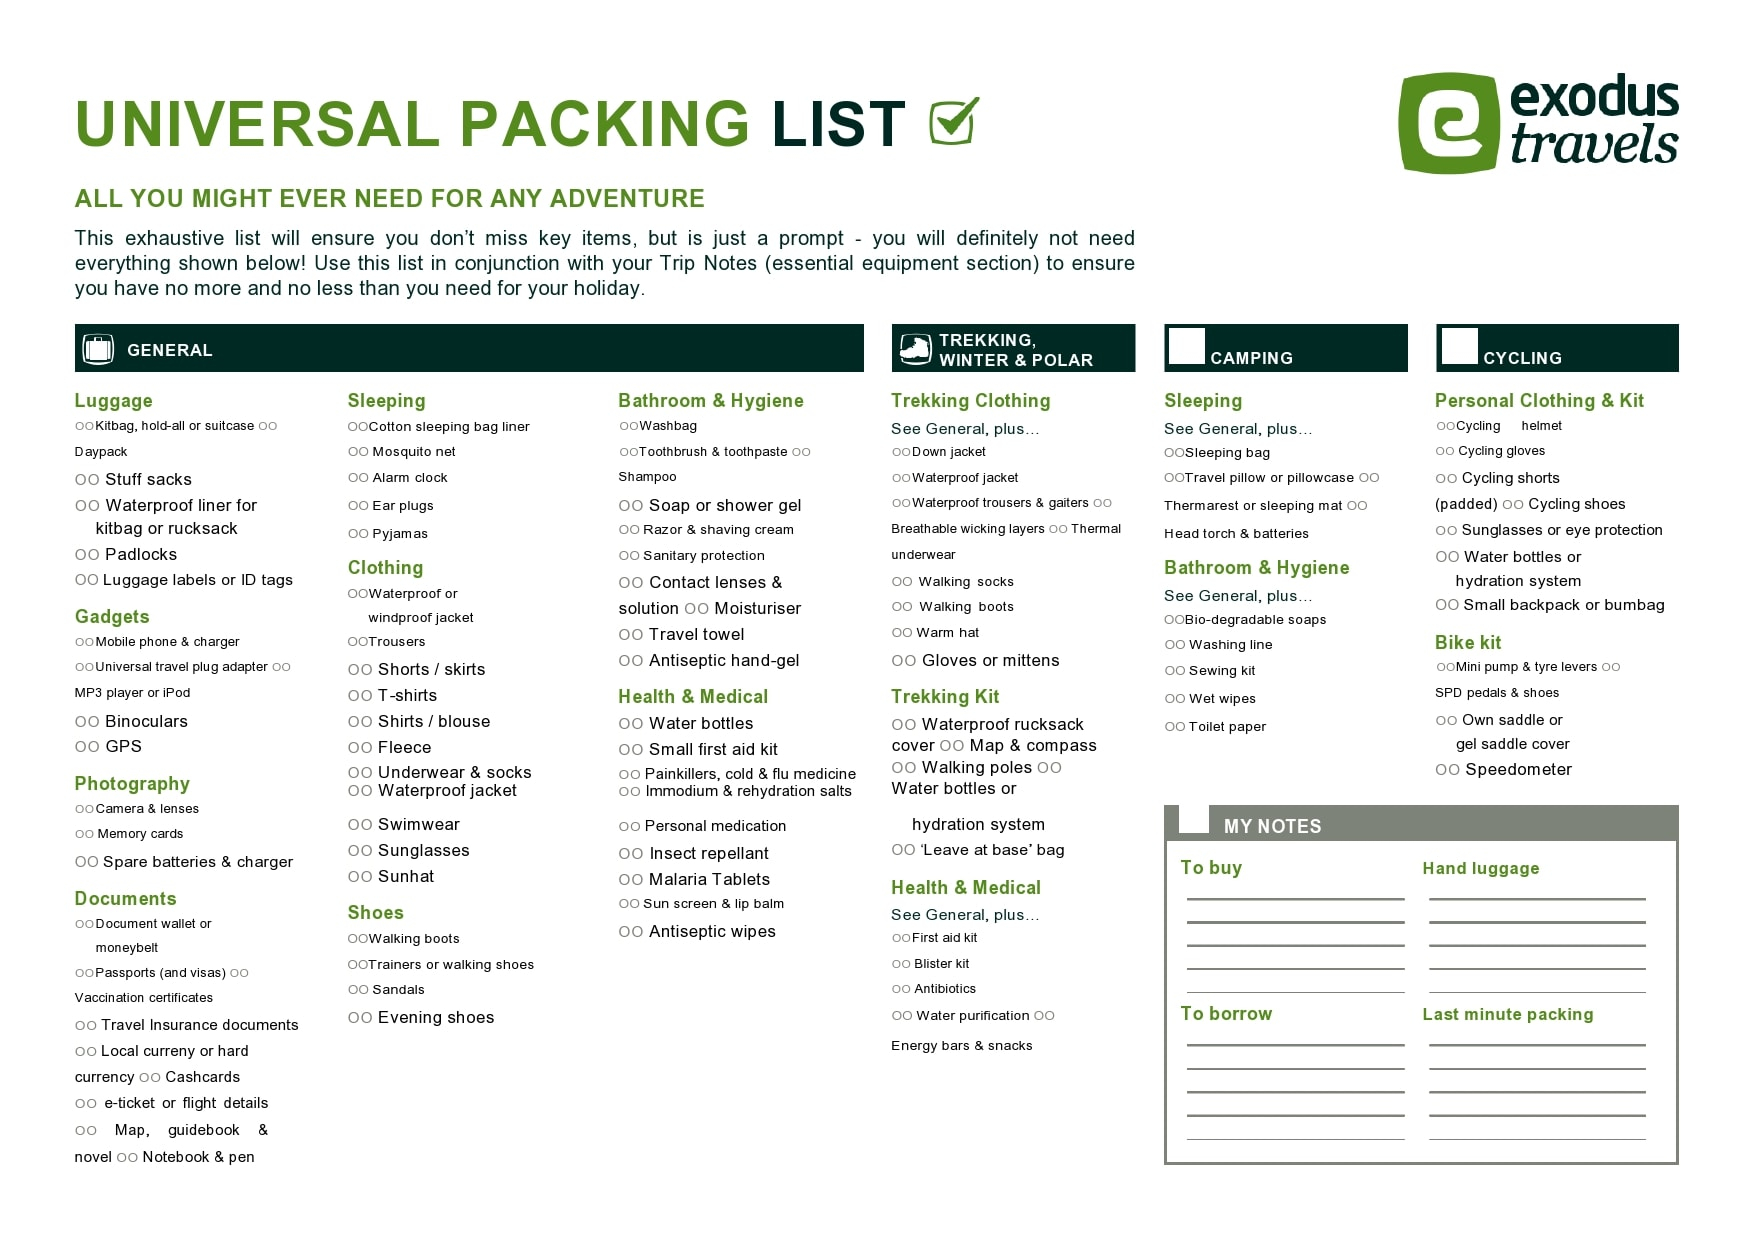 10 Packing List Templates [Excel, Word, PDF] - TemplateArchive Throughout Trip Packing Checklist Template Intended For Trip Packing Checklist Template